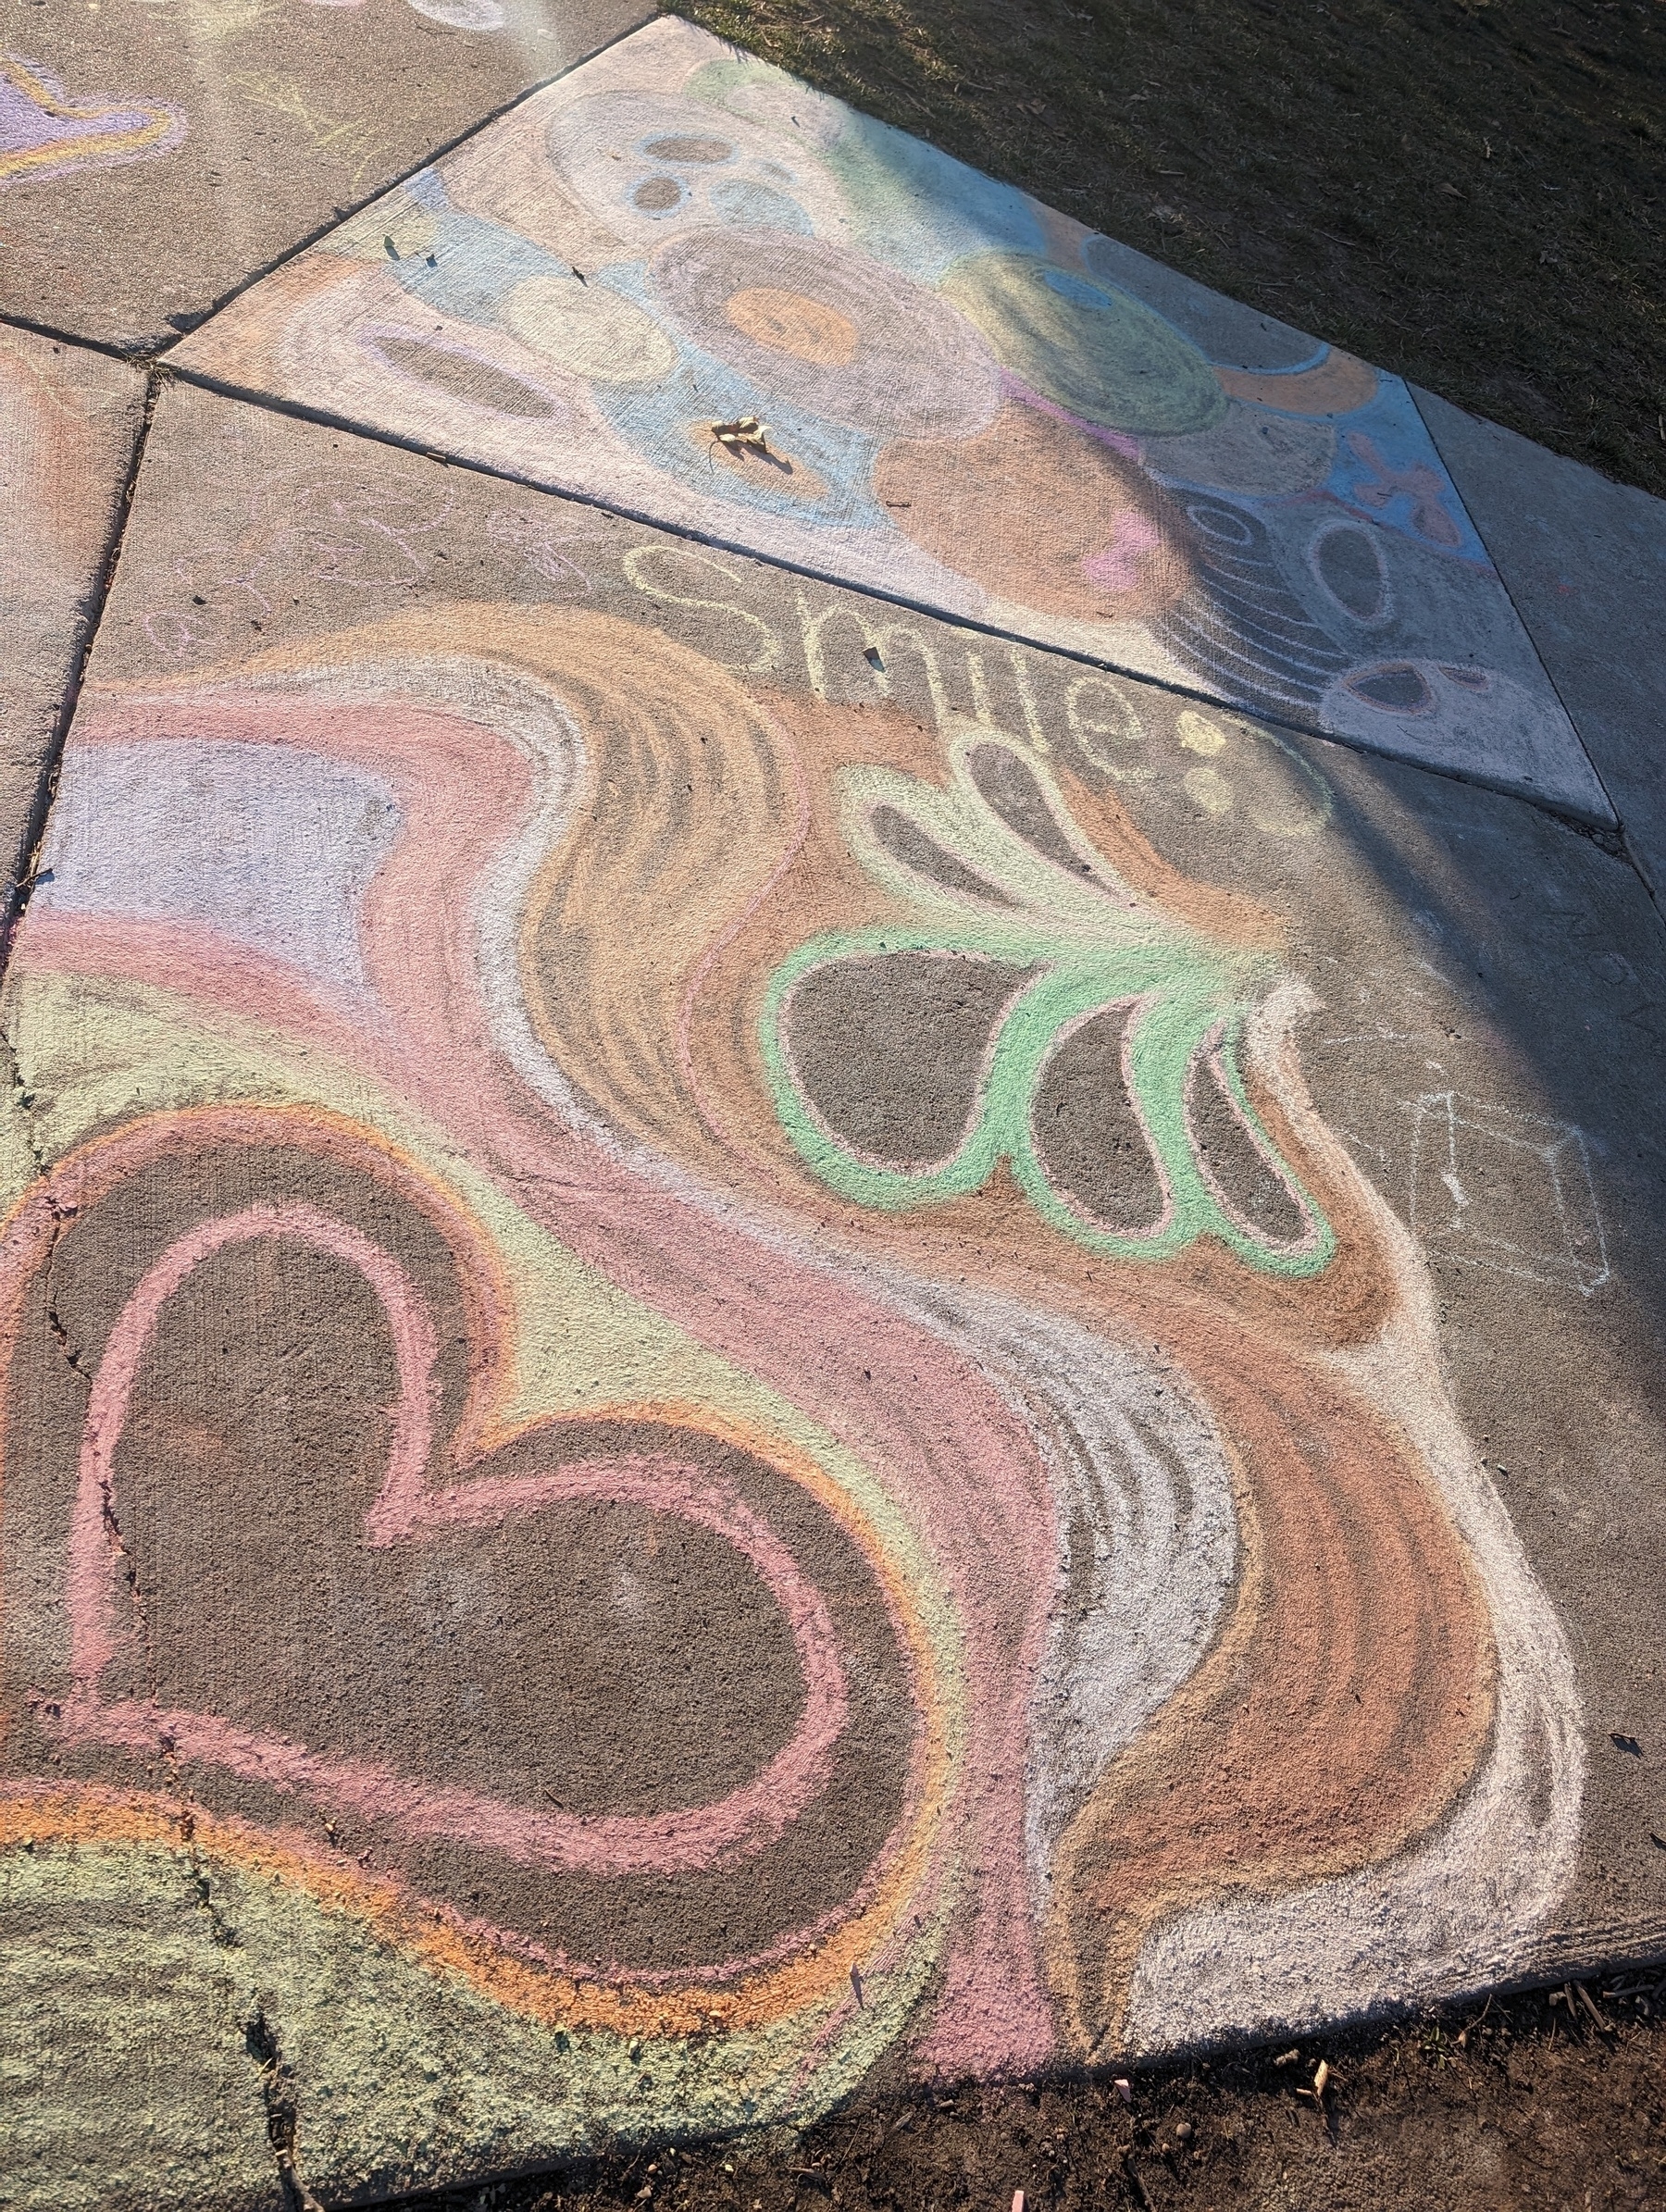 Photo of sidewalk chalk artwork. Colorful hearts, teardrop shapes, the word "smile".